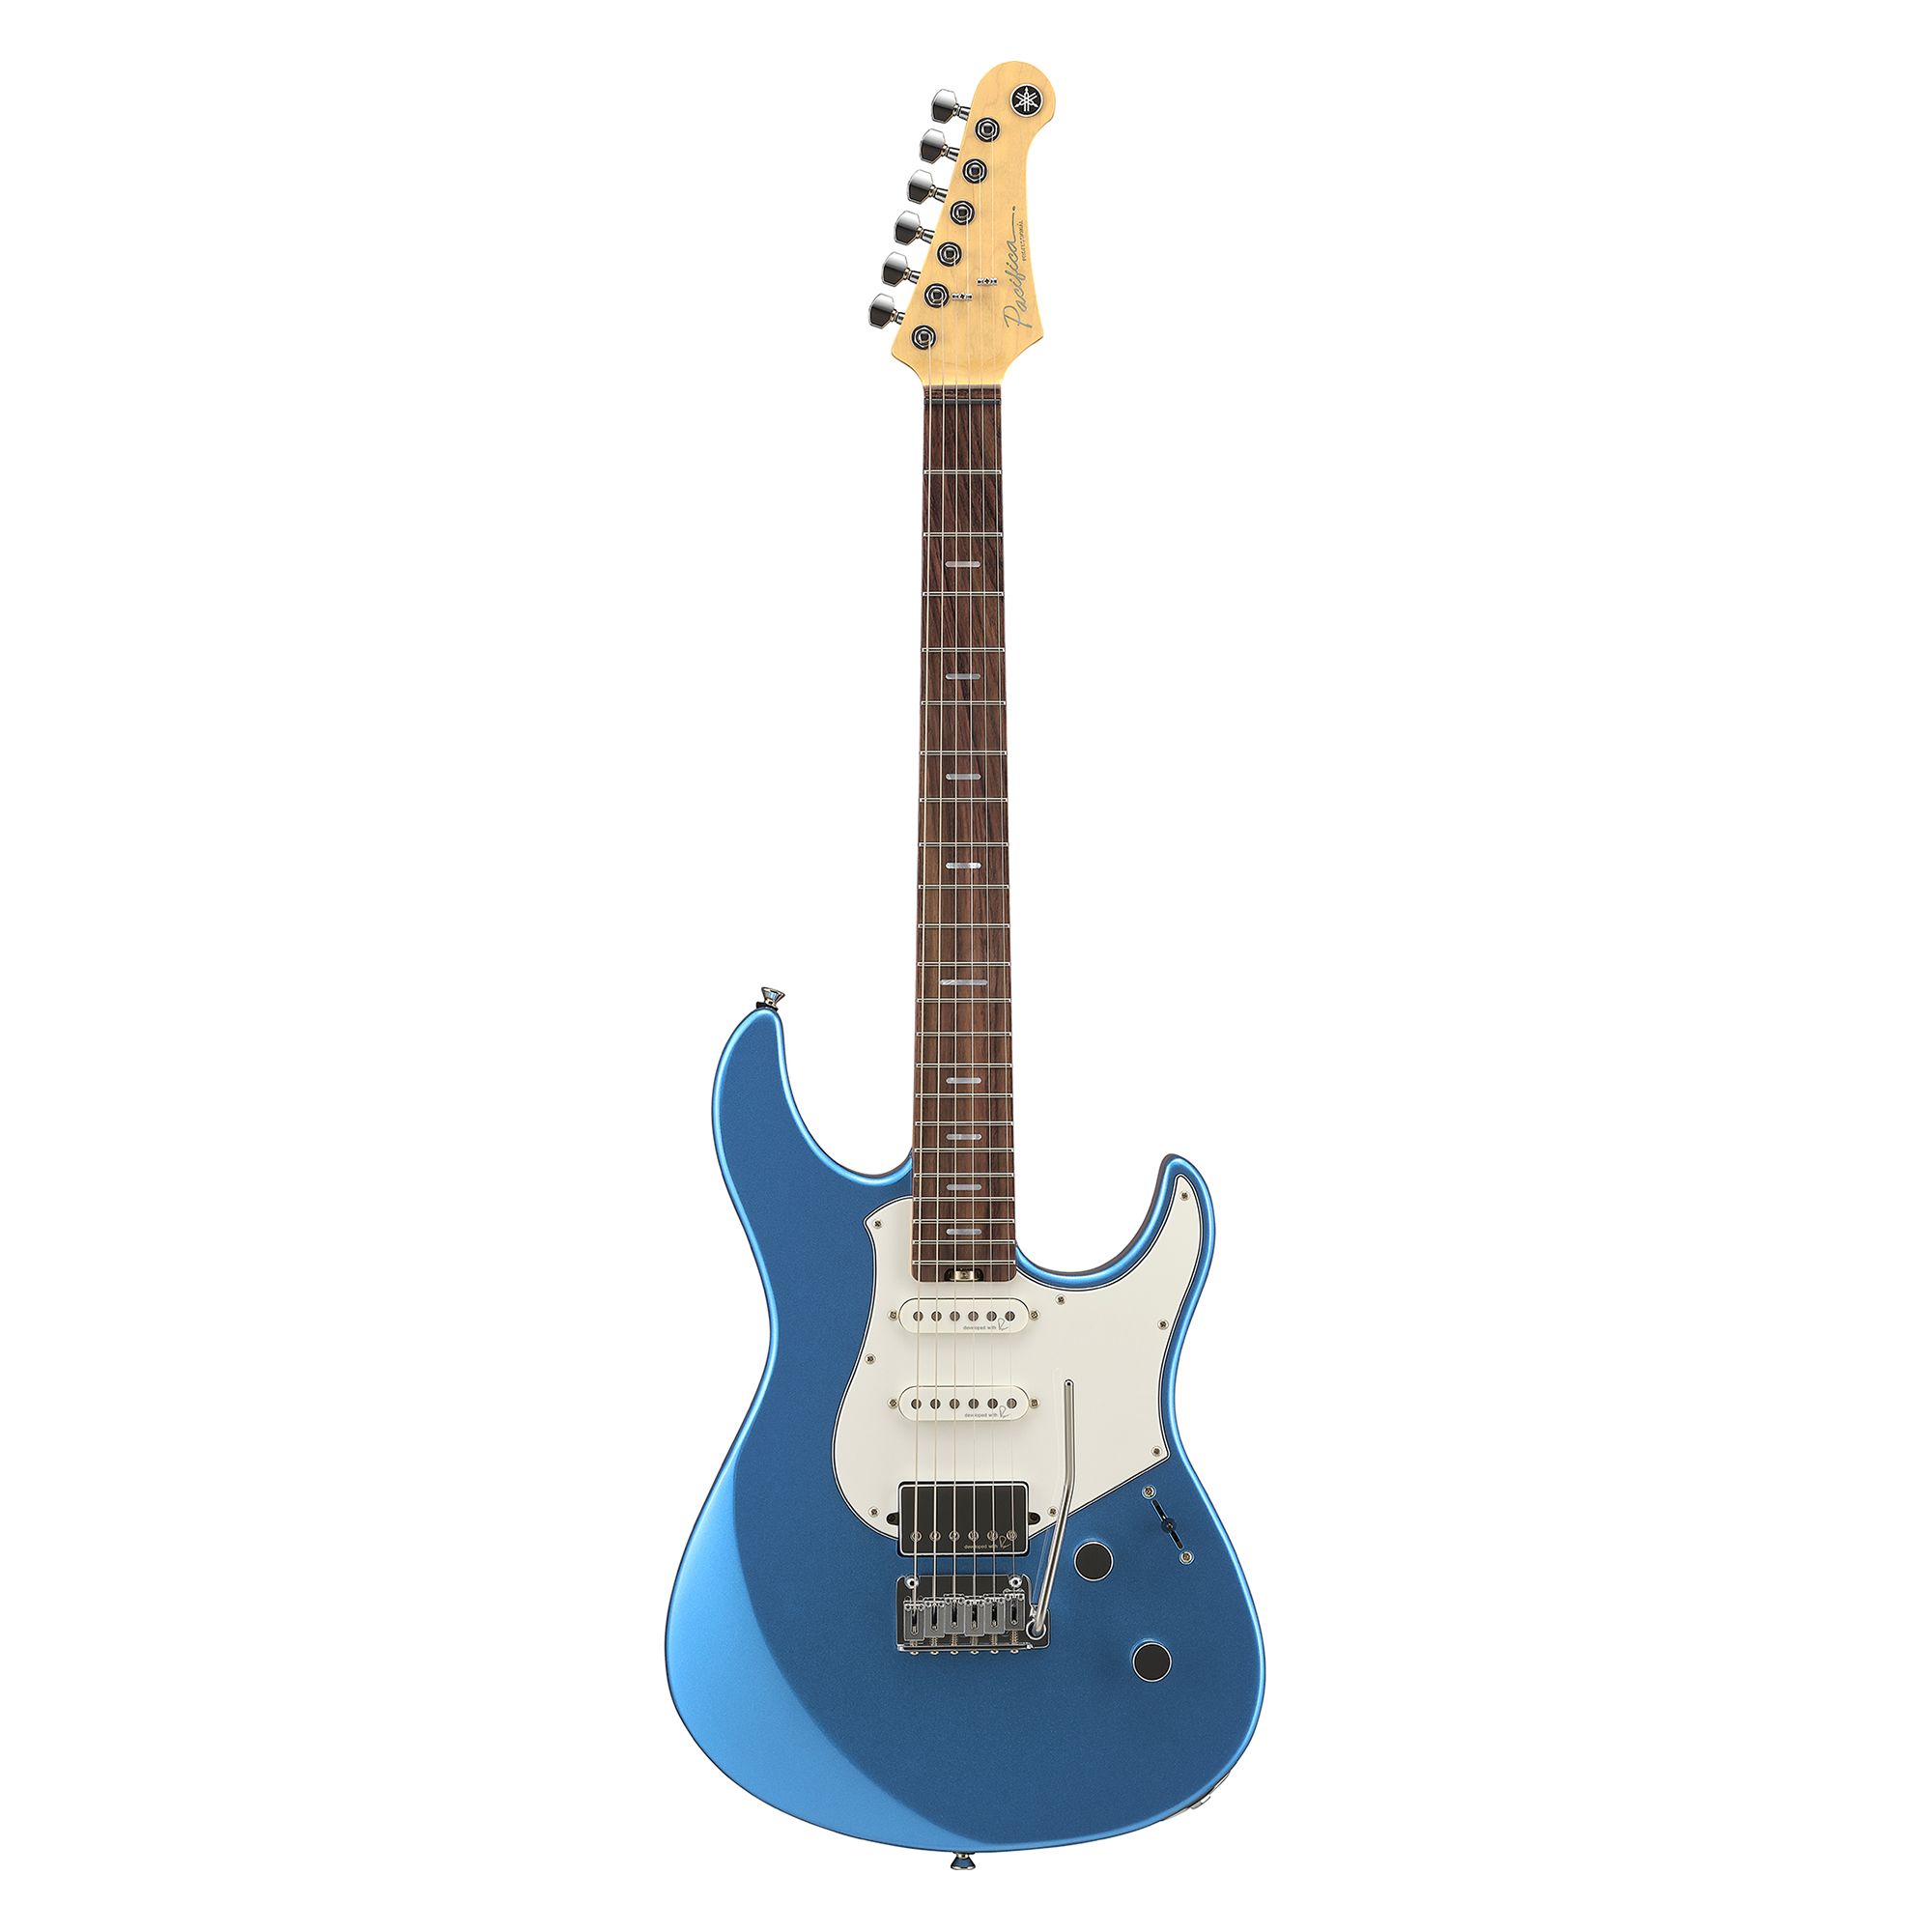 Specifications: Pacifica Electric Guitars - Yamaha USA